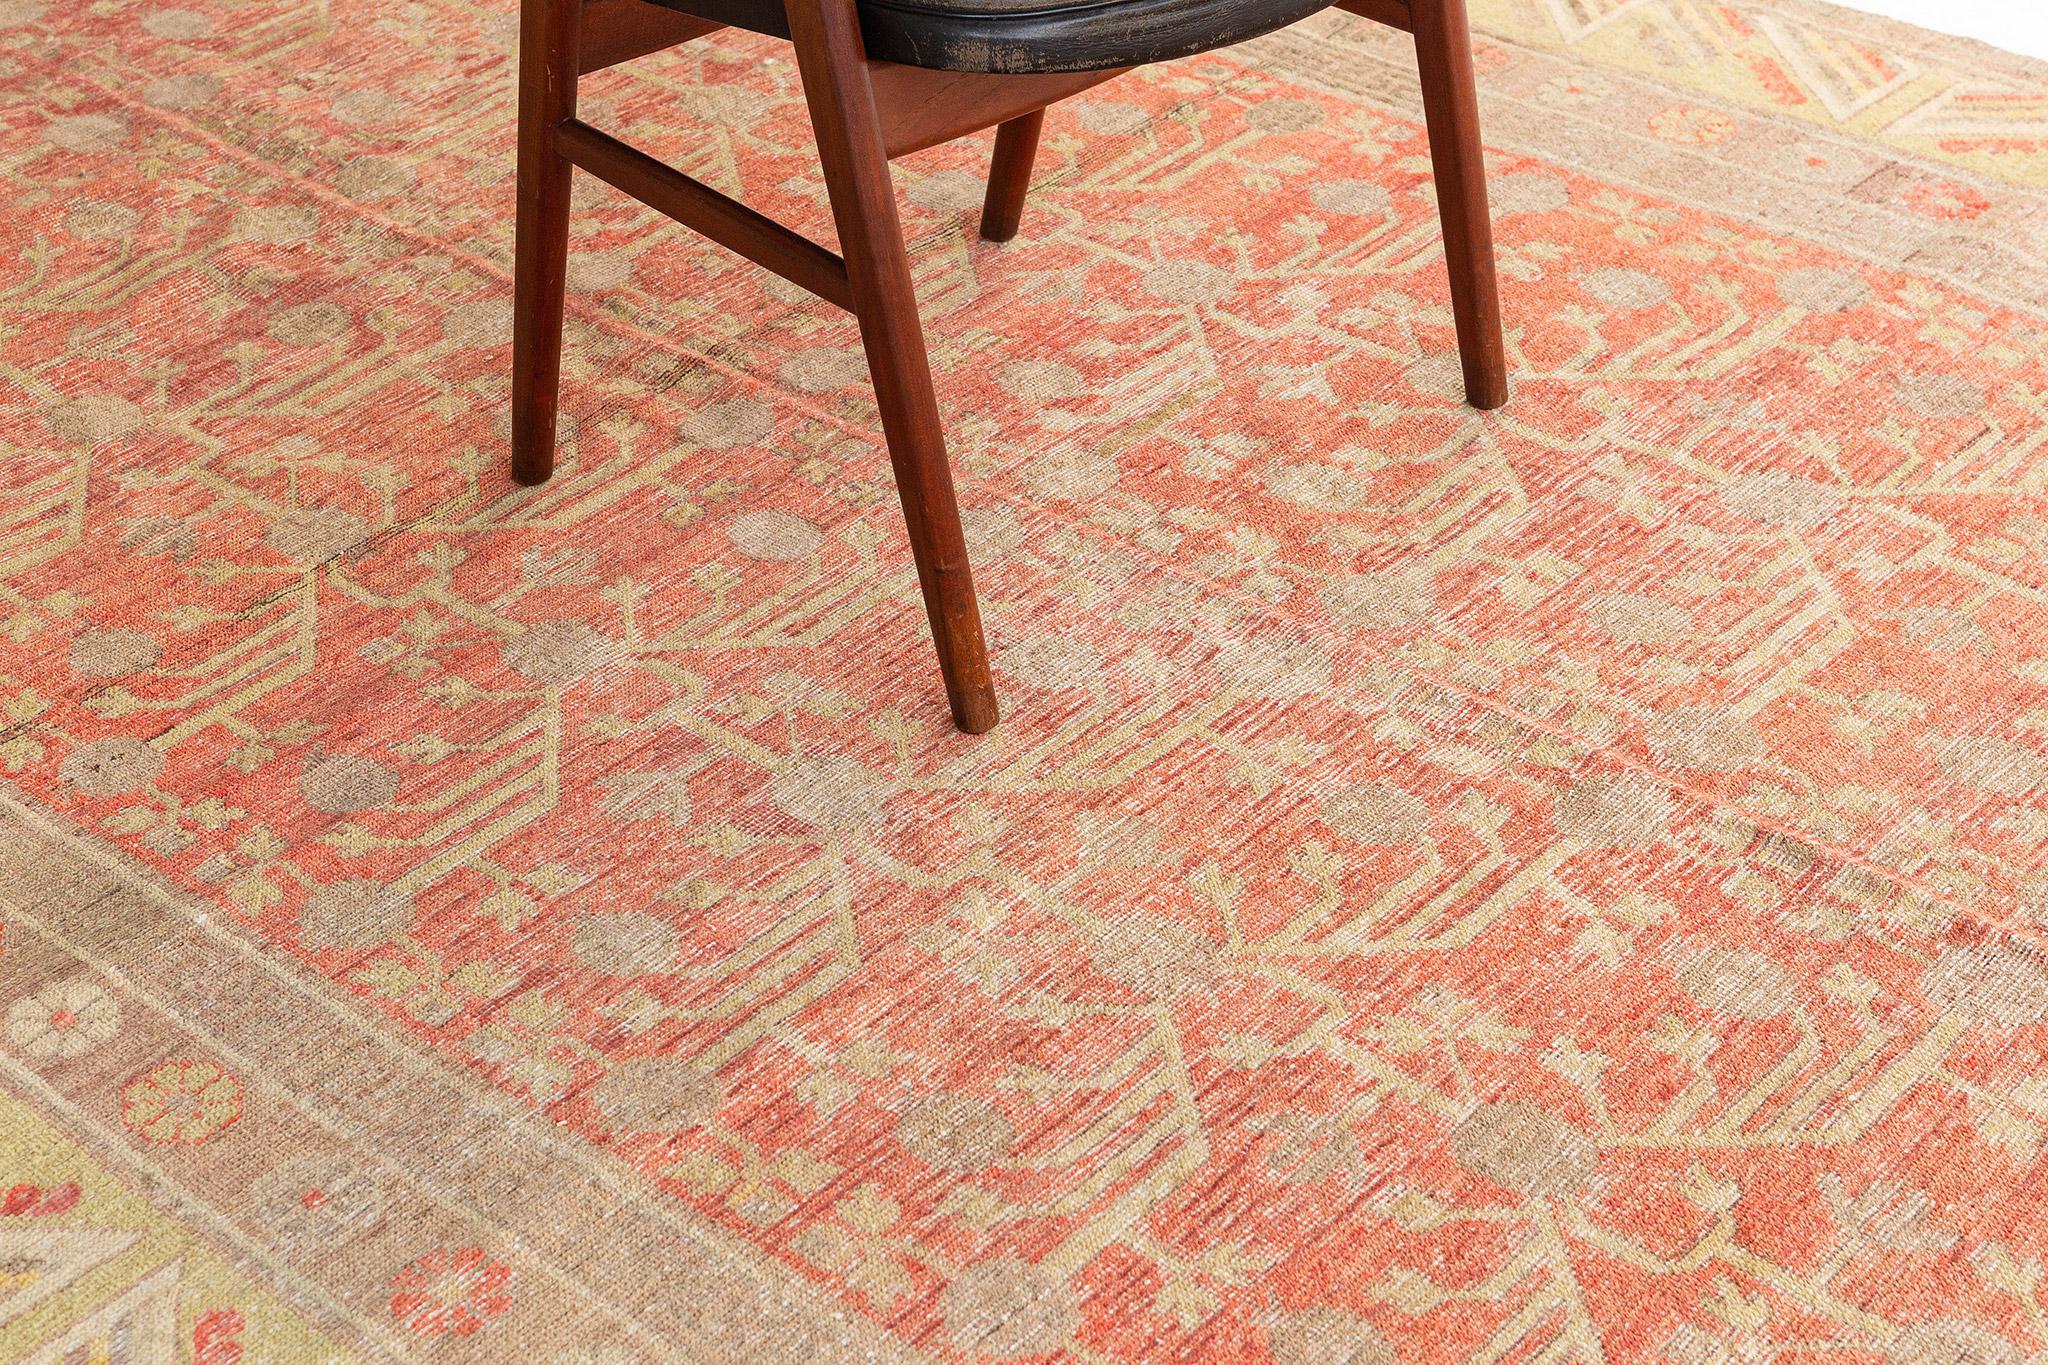 With its striking appeal and architectural elements of naturalistic forms, thisantique Turkestan Khotan rug can beautifully blend modern, traditional, and contemporary interiors. The weathered field is covered in an all-over botanical pomegranate